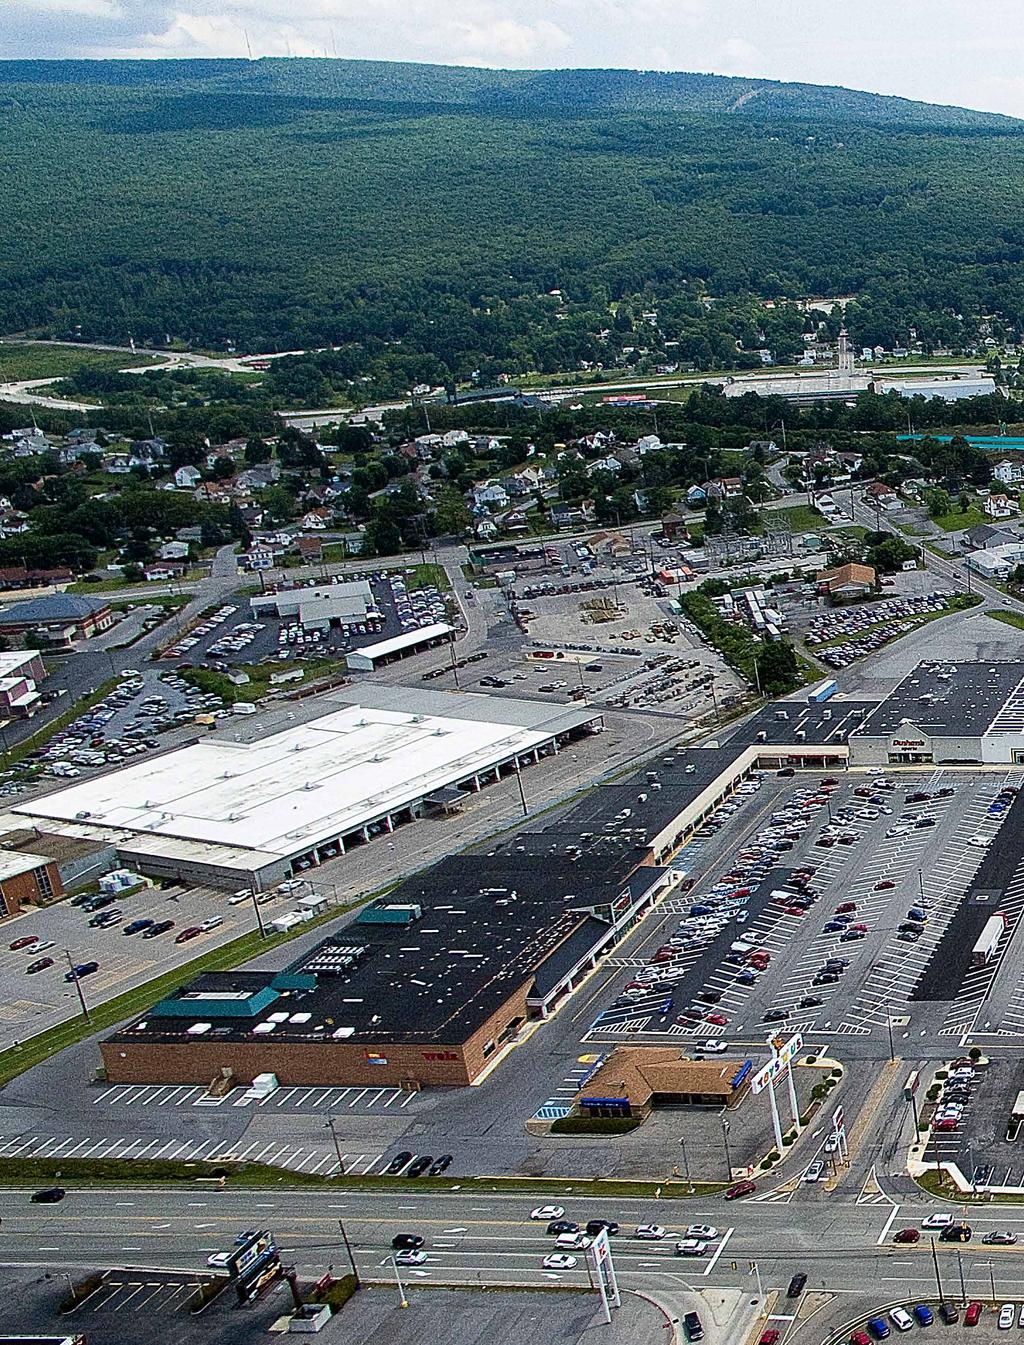 This 278,586 SF grocery anchored shopping center is located in the primary retail corridor of Altoona,